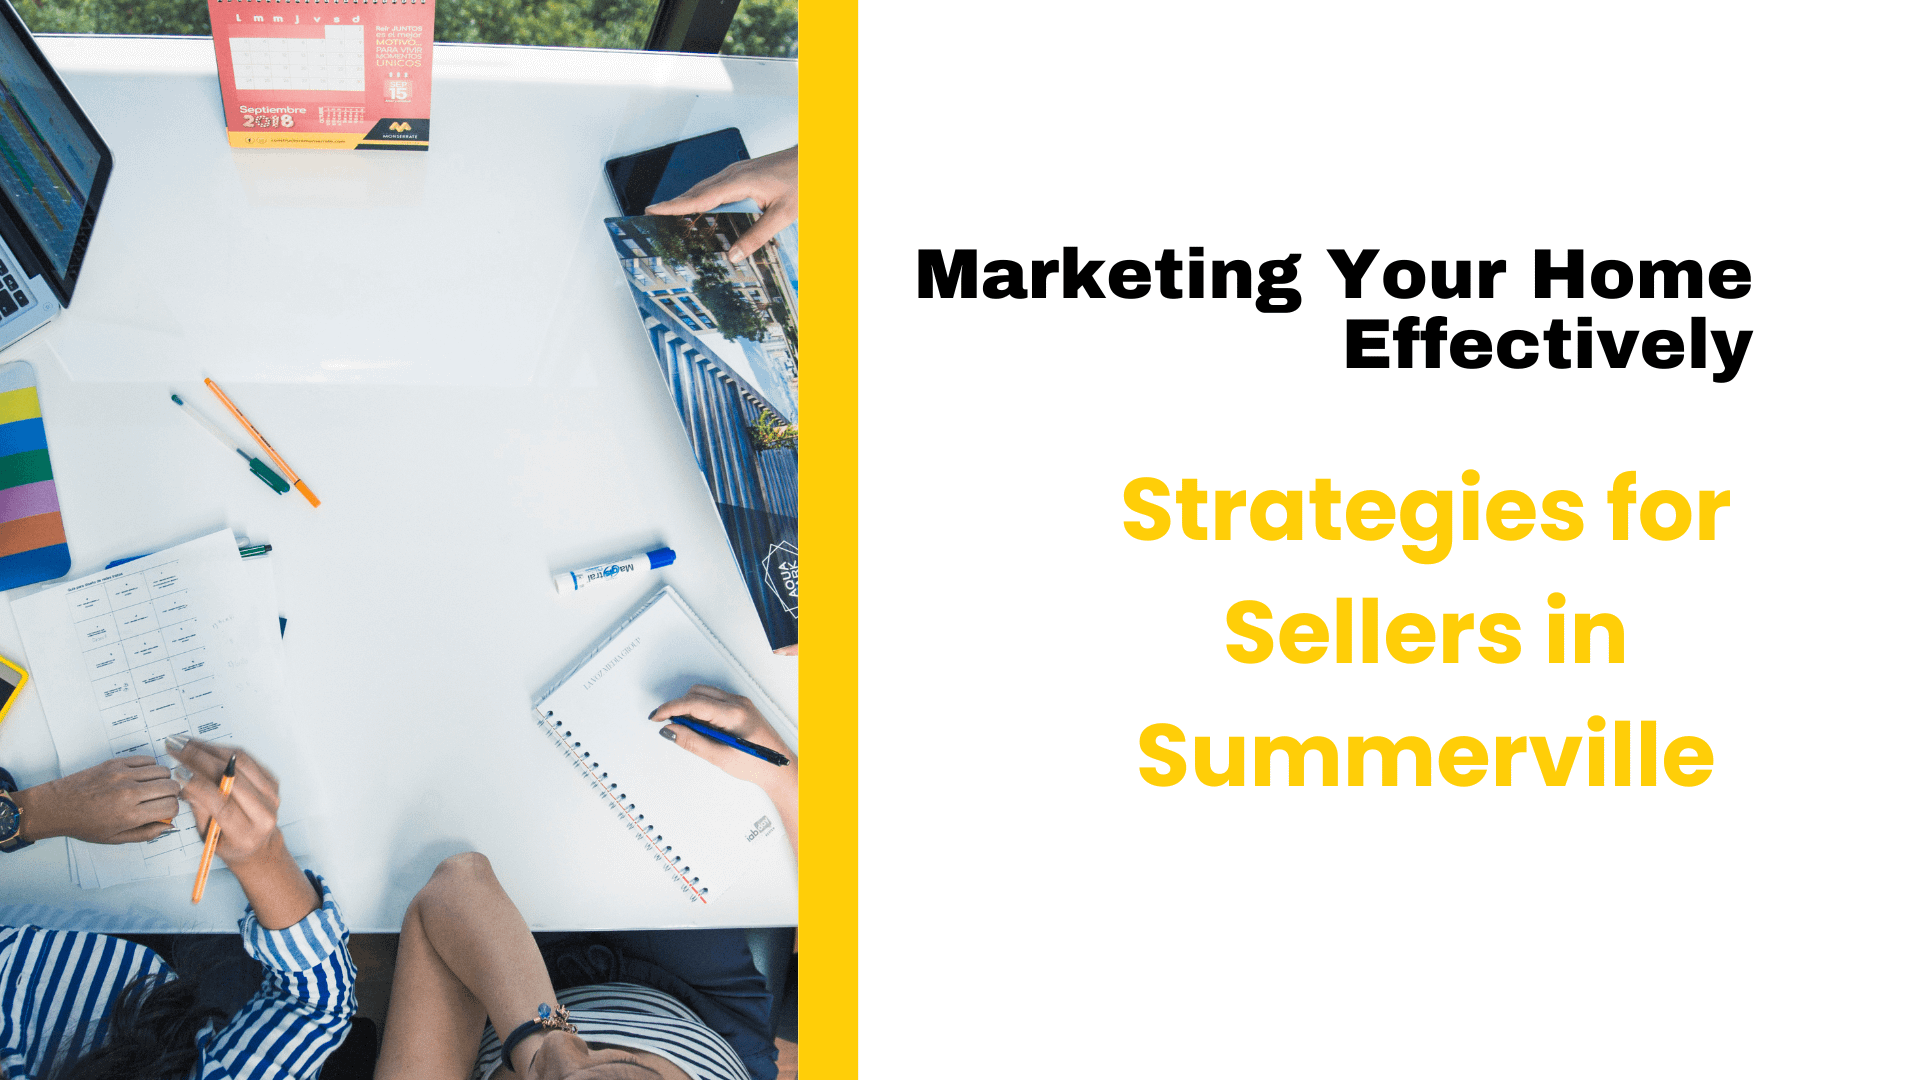 Marketing Your Home Effectively: Strategies for Sellers in Summerville